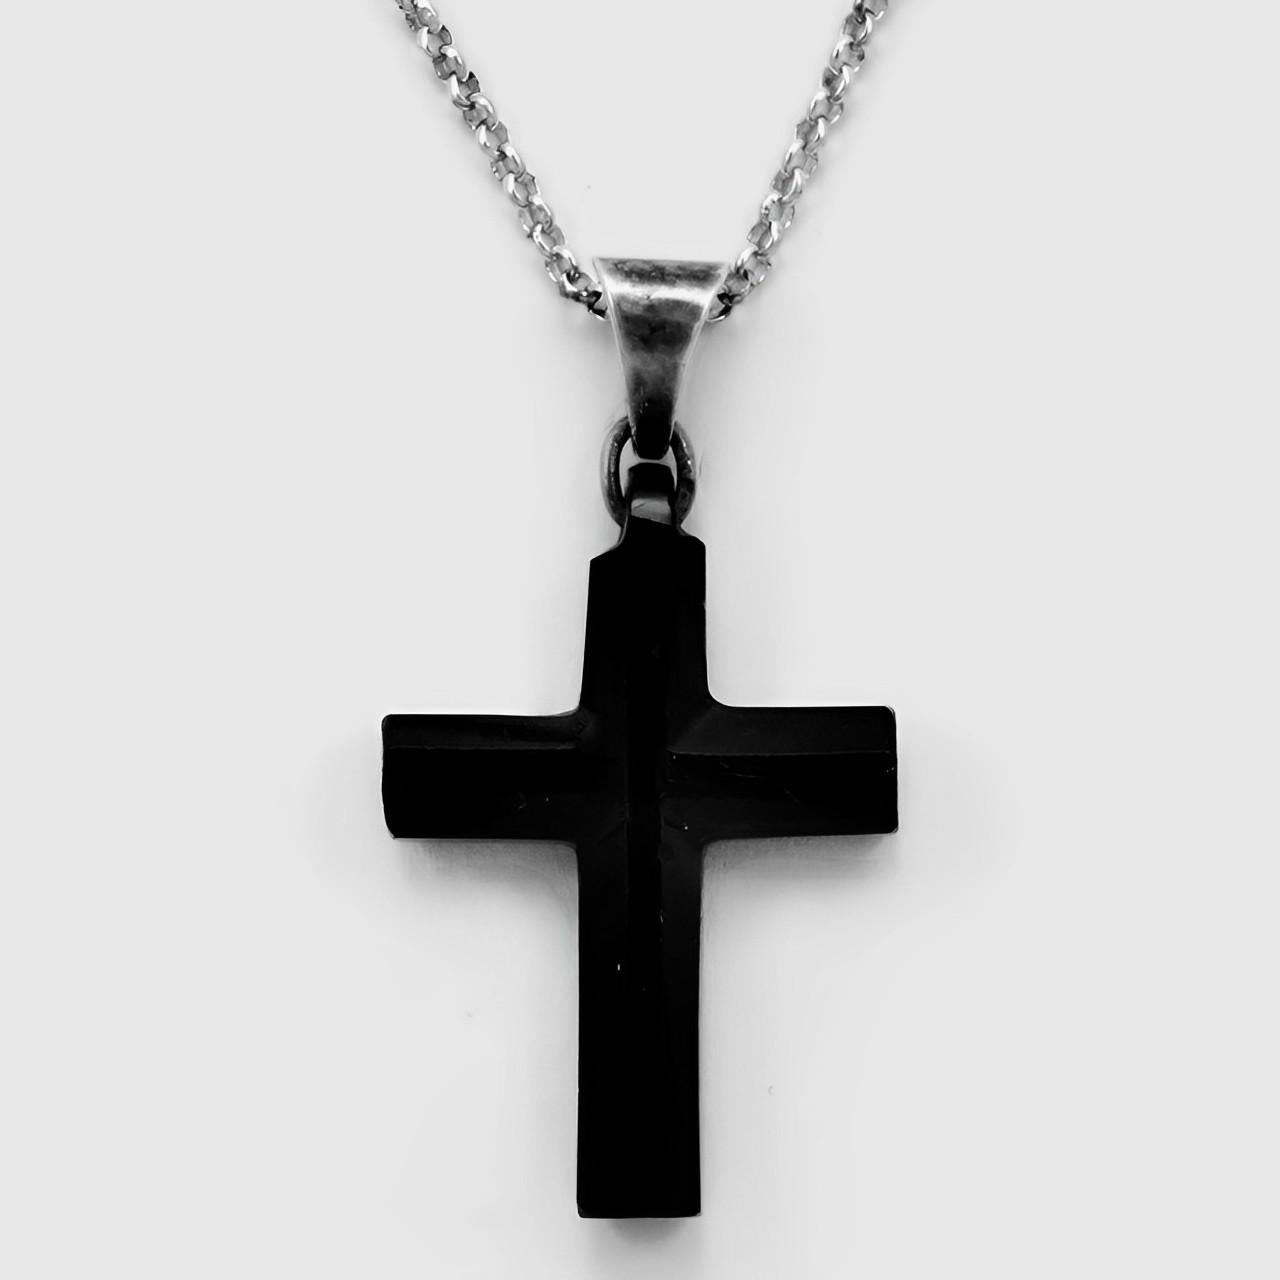 Antique Victorian faceted french jet cross pendant with a silver bail. The cross hangs on a quality modern silver belcher chain, which is adjustable and soldered on each link. Measuring length 45.9 cm / 18 inches, and the pendant, not including the